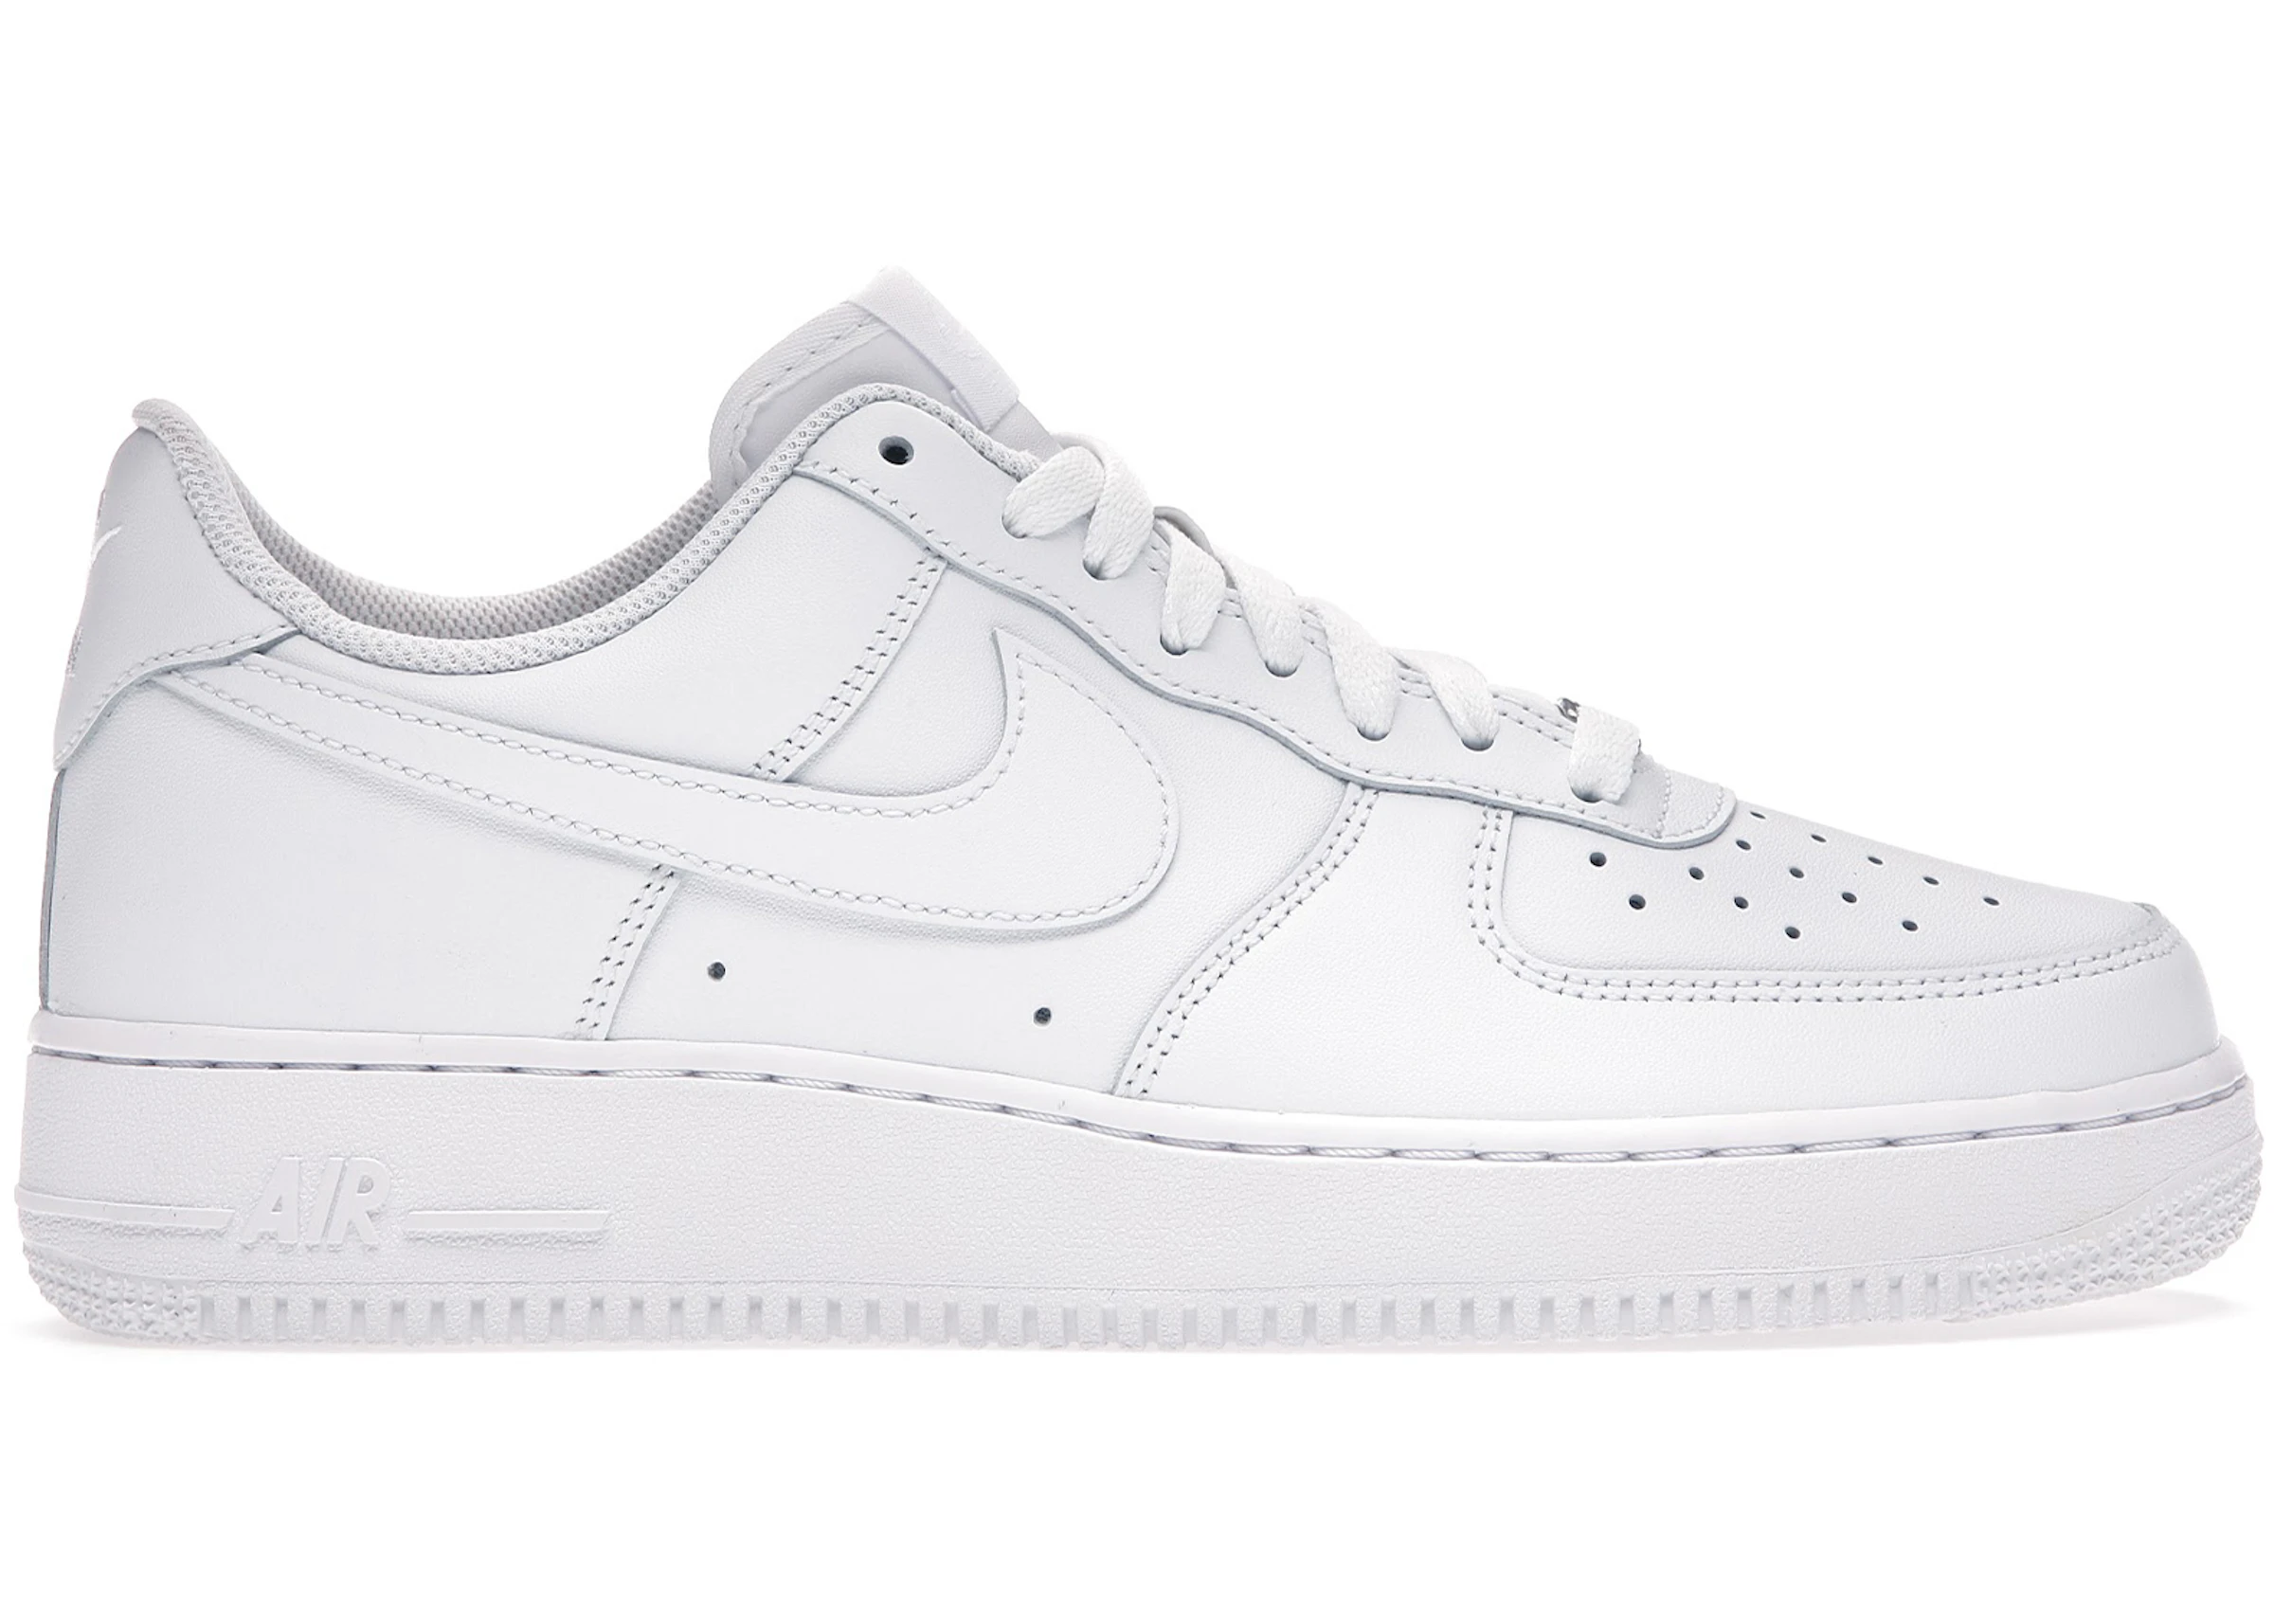 home controller speaker Buy Nike Air Force 1 - Low White